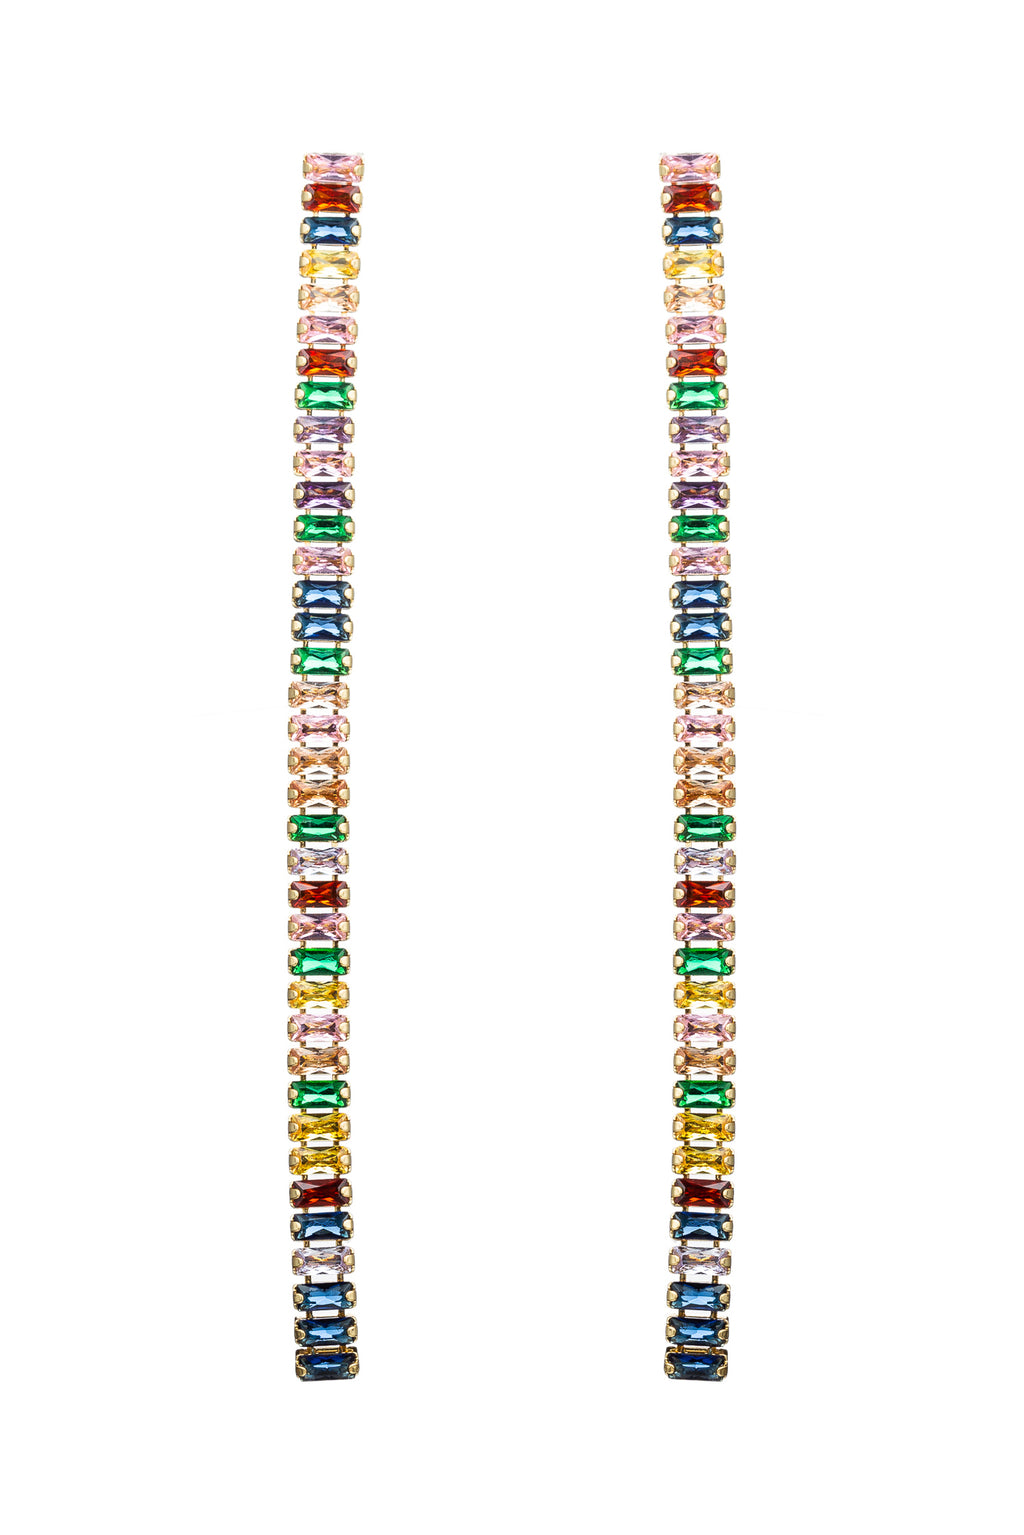 18k gold plated rainbow earrings studded with CZ crystals.